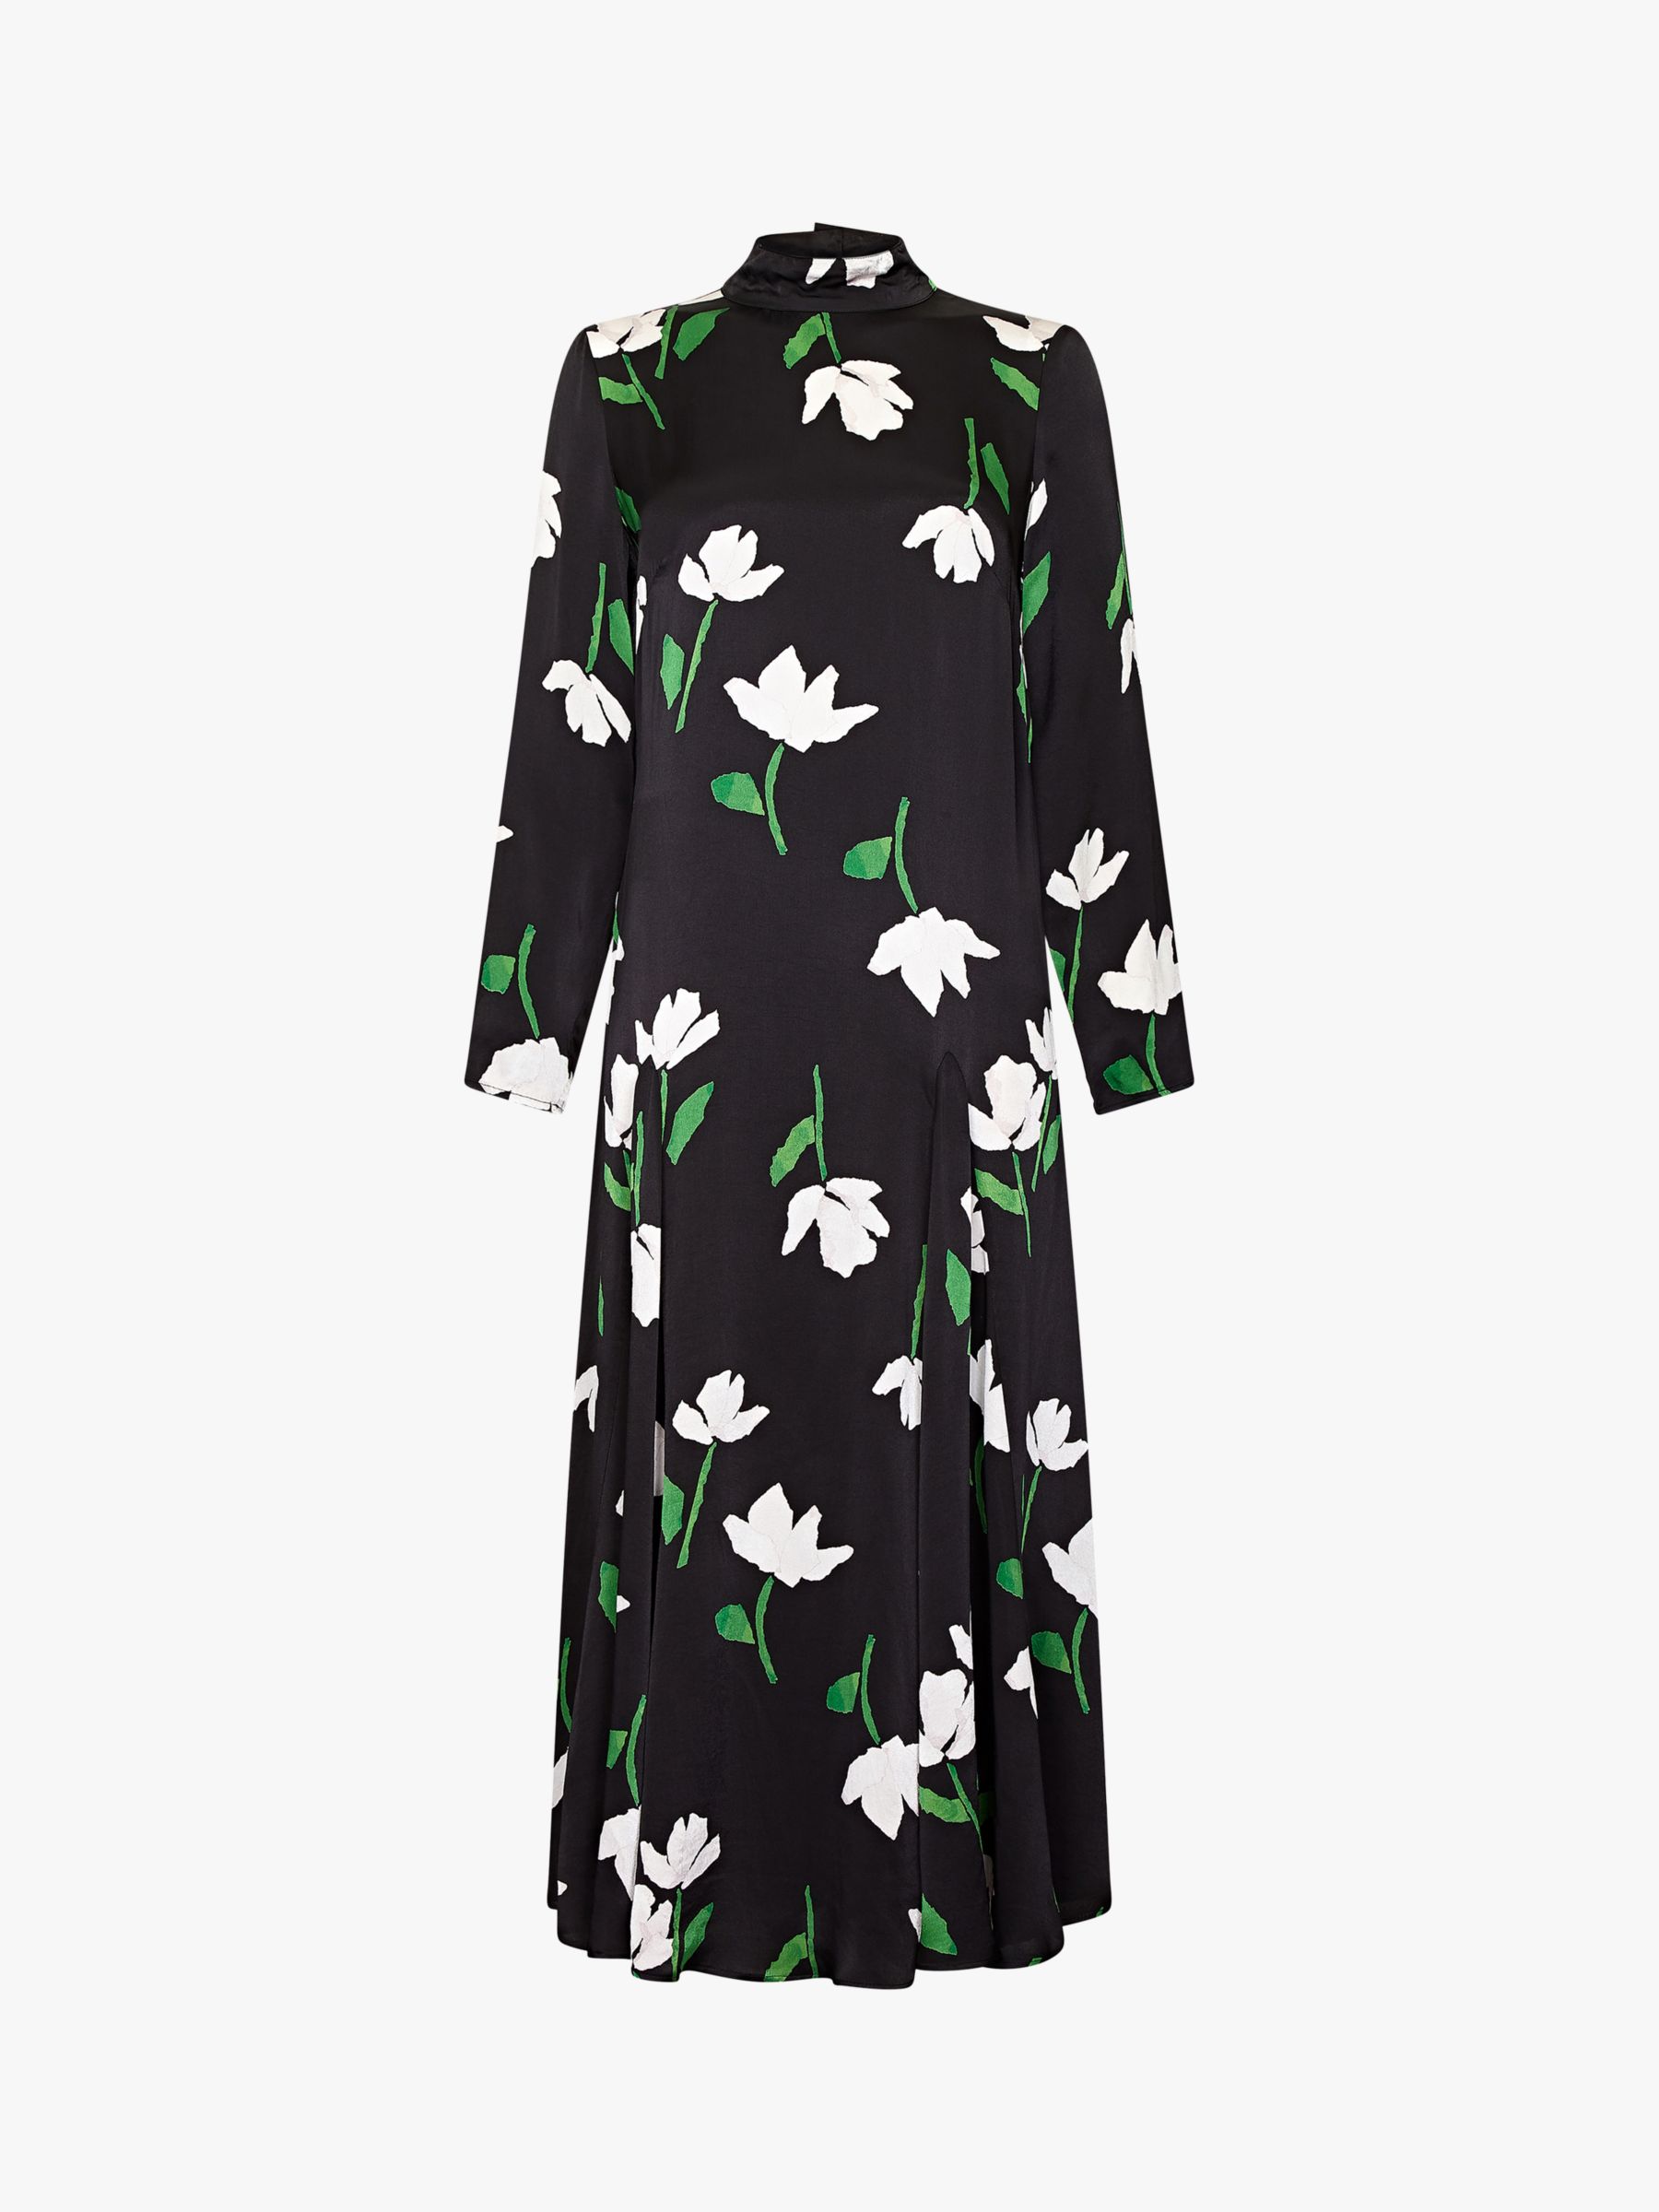 dress black with flowers